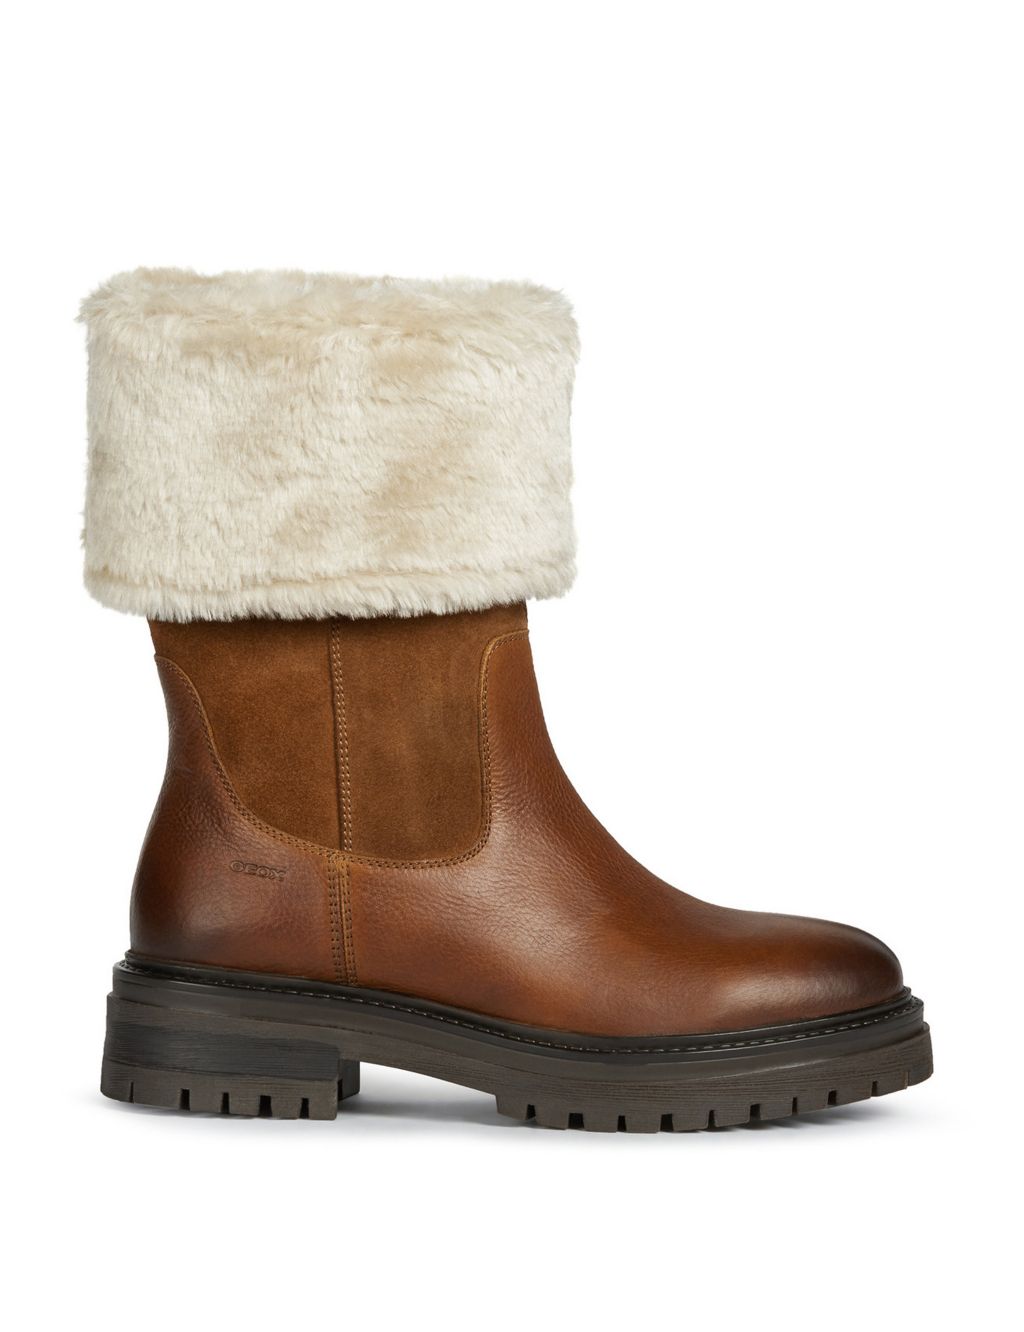 Leather Faux Fur Chunky Winter Boots image 1